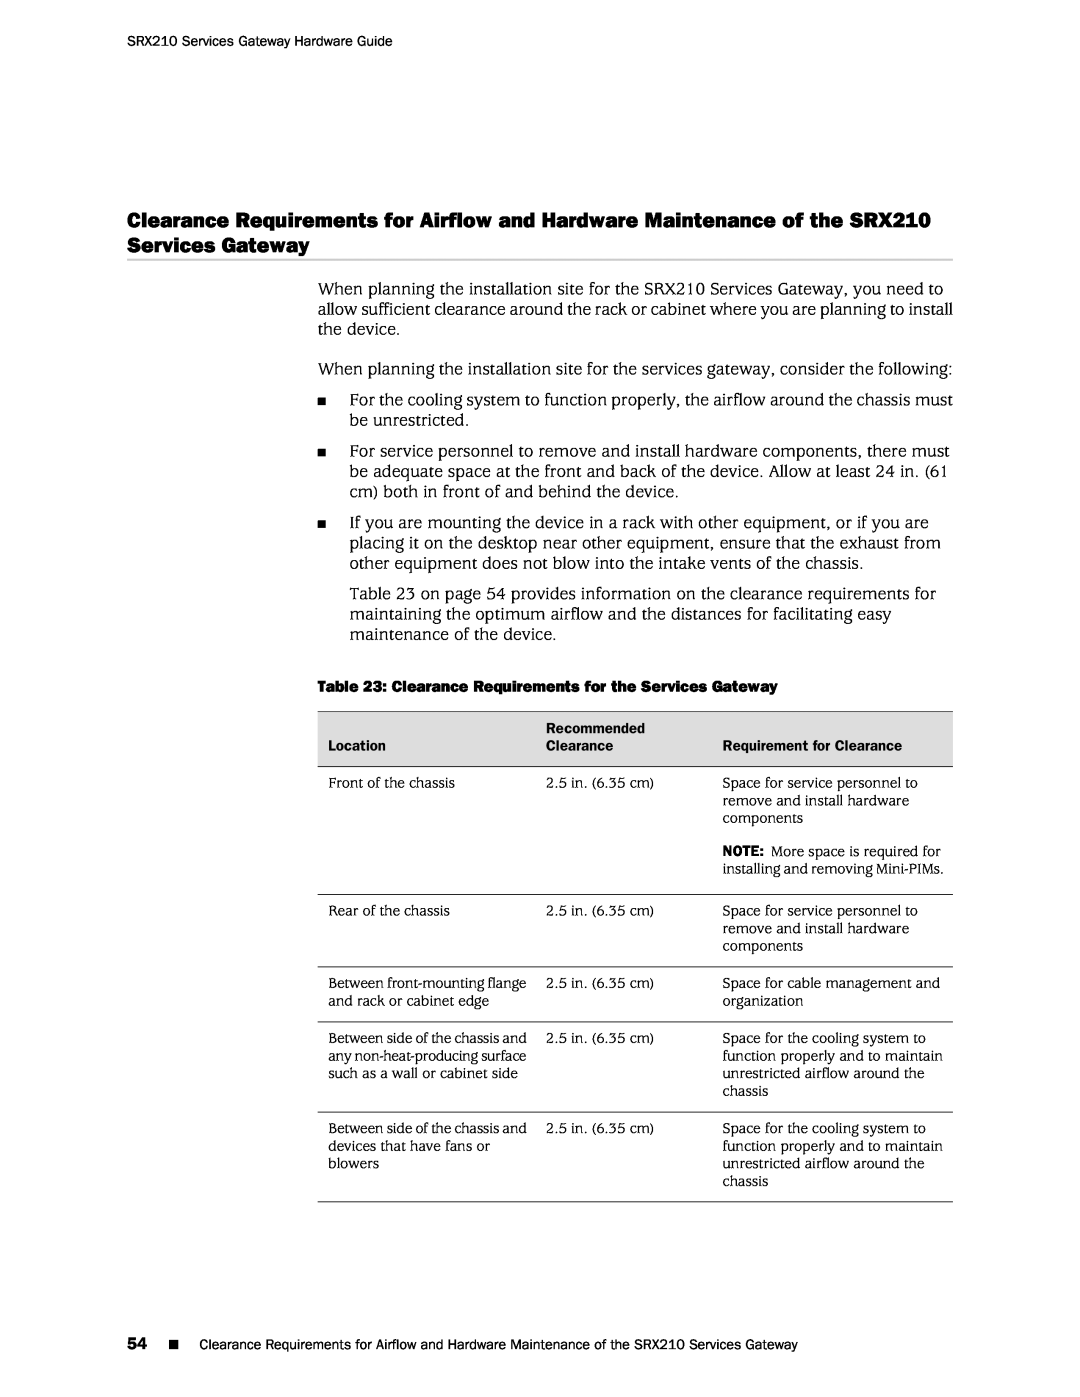 Juniper Networks SRX 210 manual Clearance Requirements for the Services Gateway 